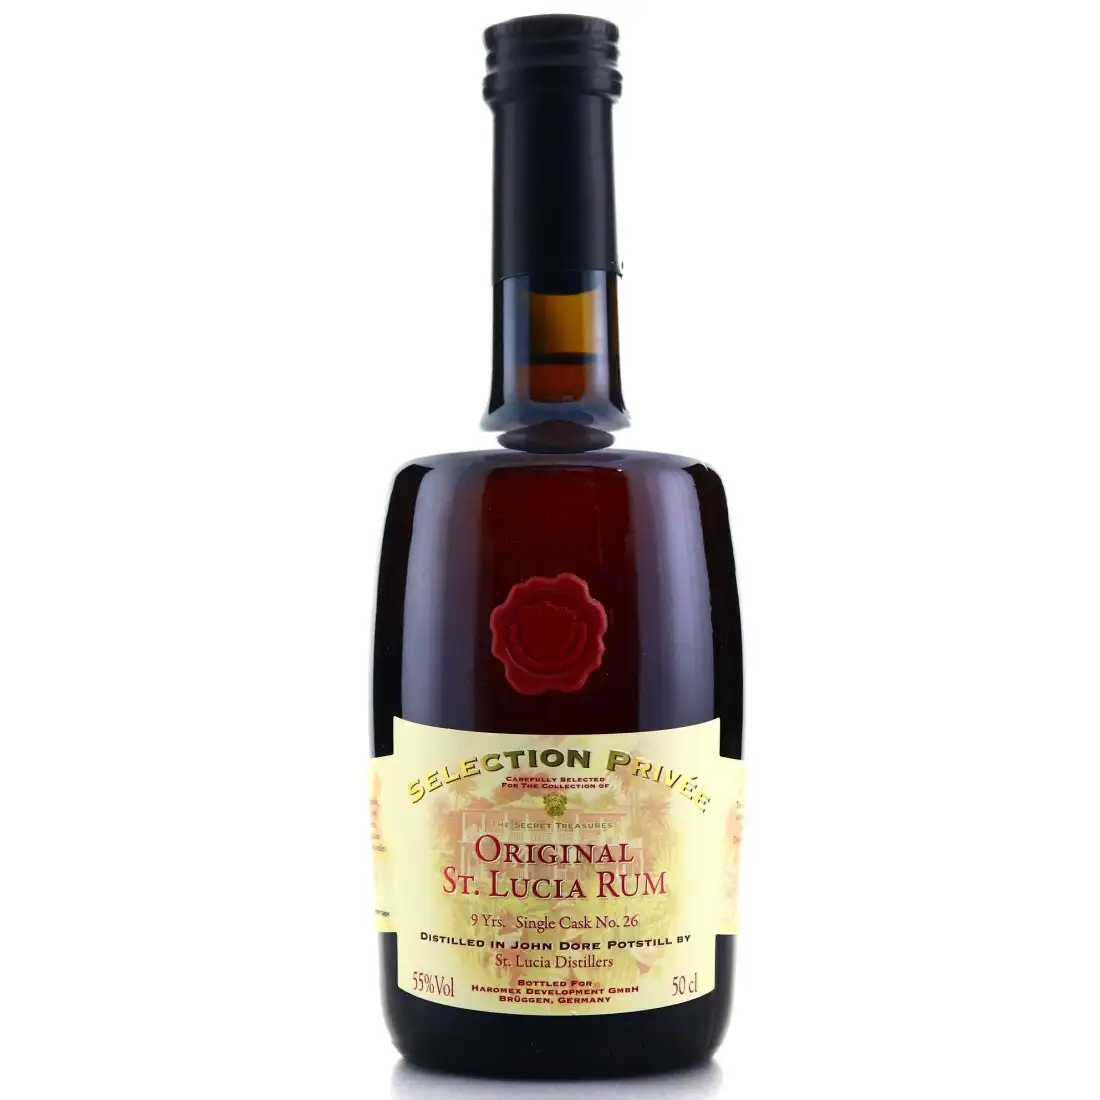 Image of the front of the bottle of the rum Secret Treasures The Selection Privée John Dore